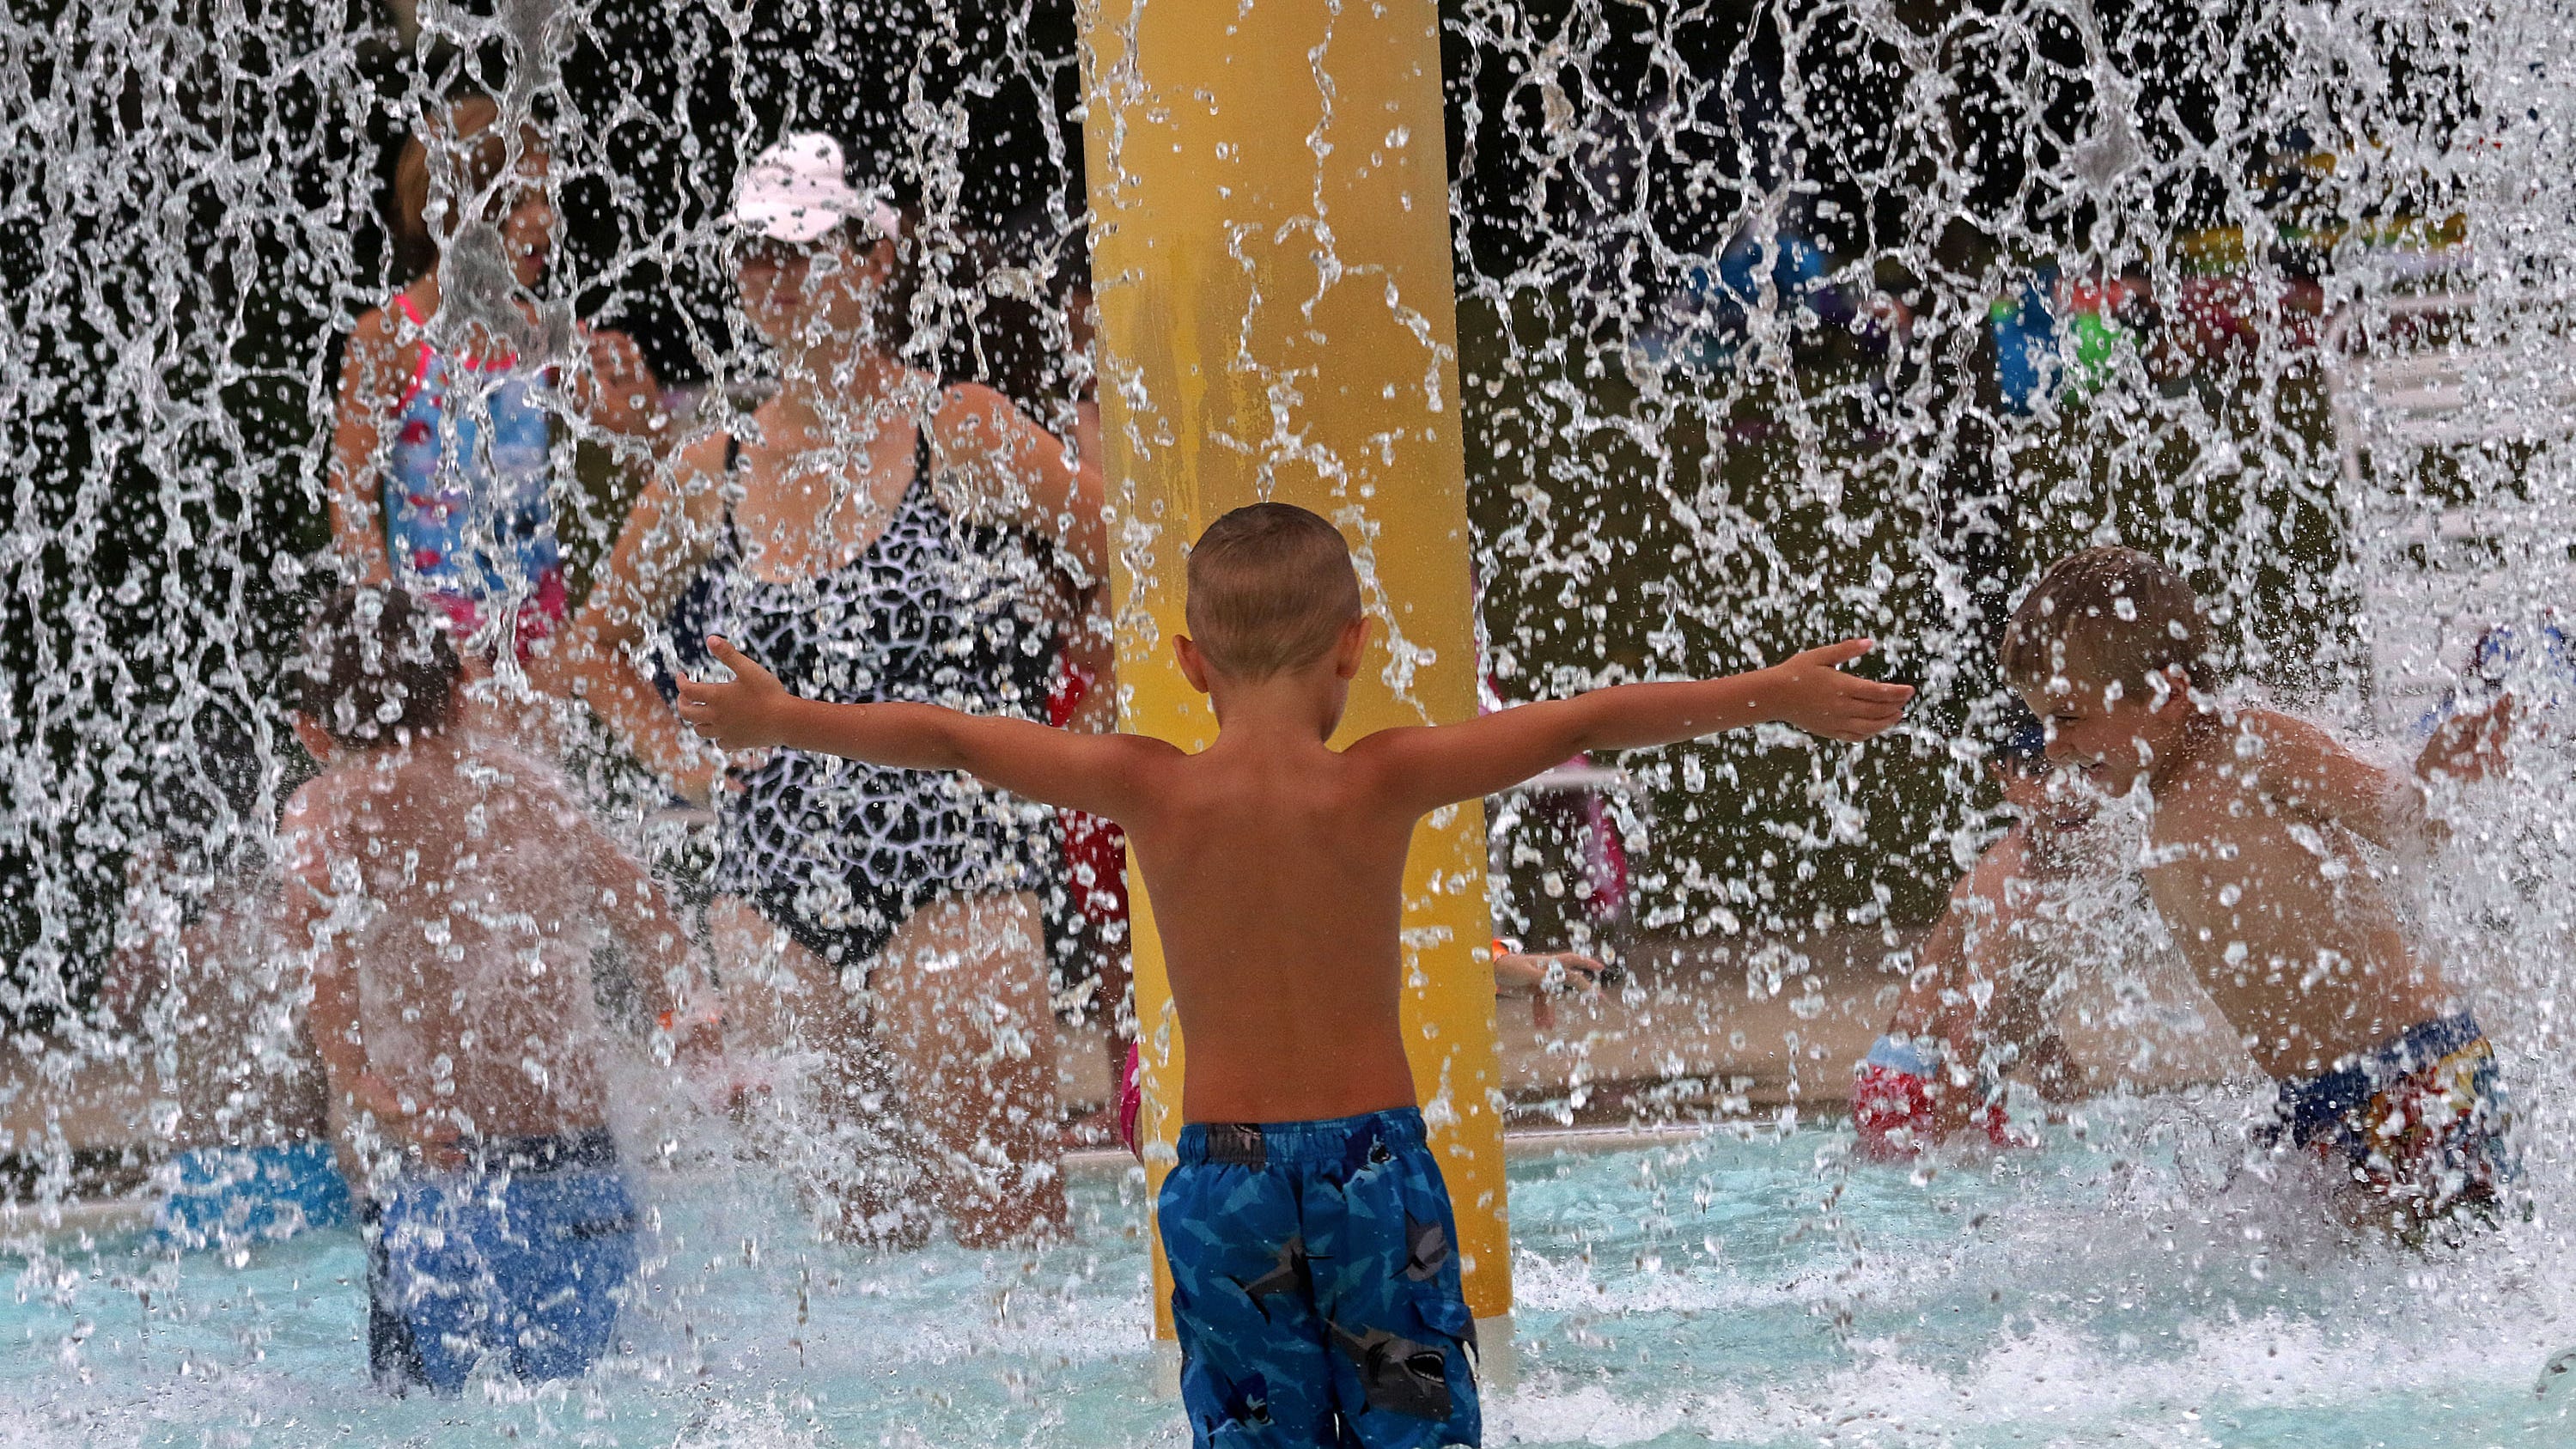 Cool Waters Aquatic Park in West Allis to remain closed in 2022